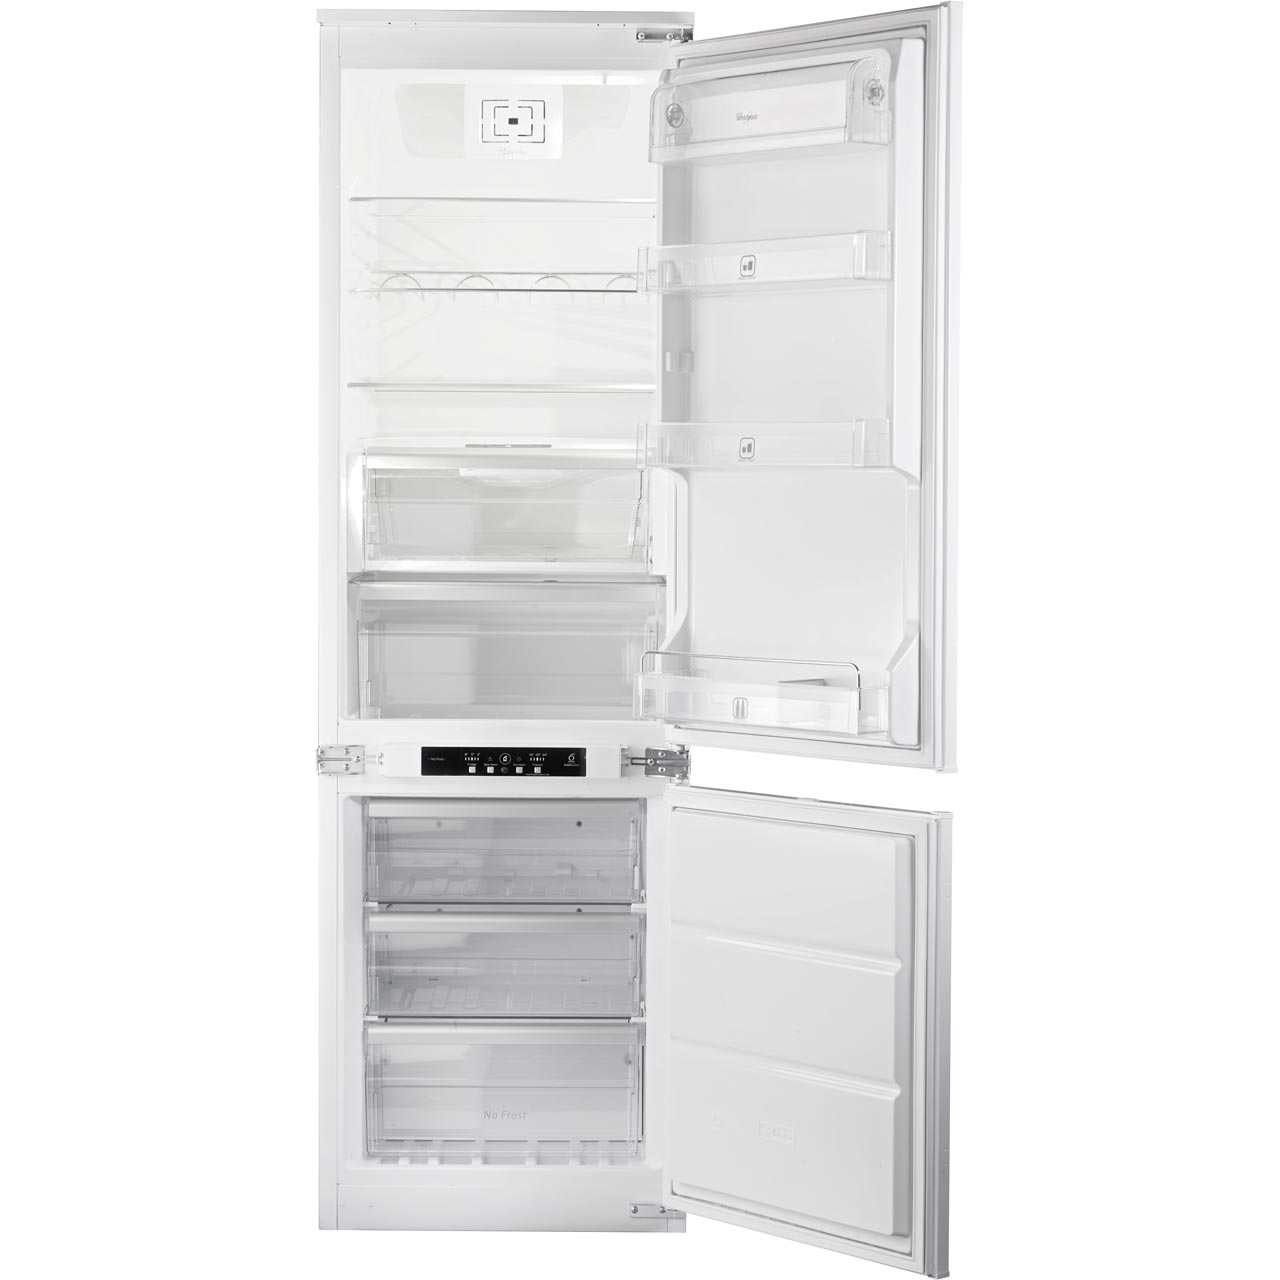 Whirlpool ART195/63A+/NF.1 Integrated 70/30 Frost Free Fridge Freezer with Sliding Door Fixing Kit Review